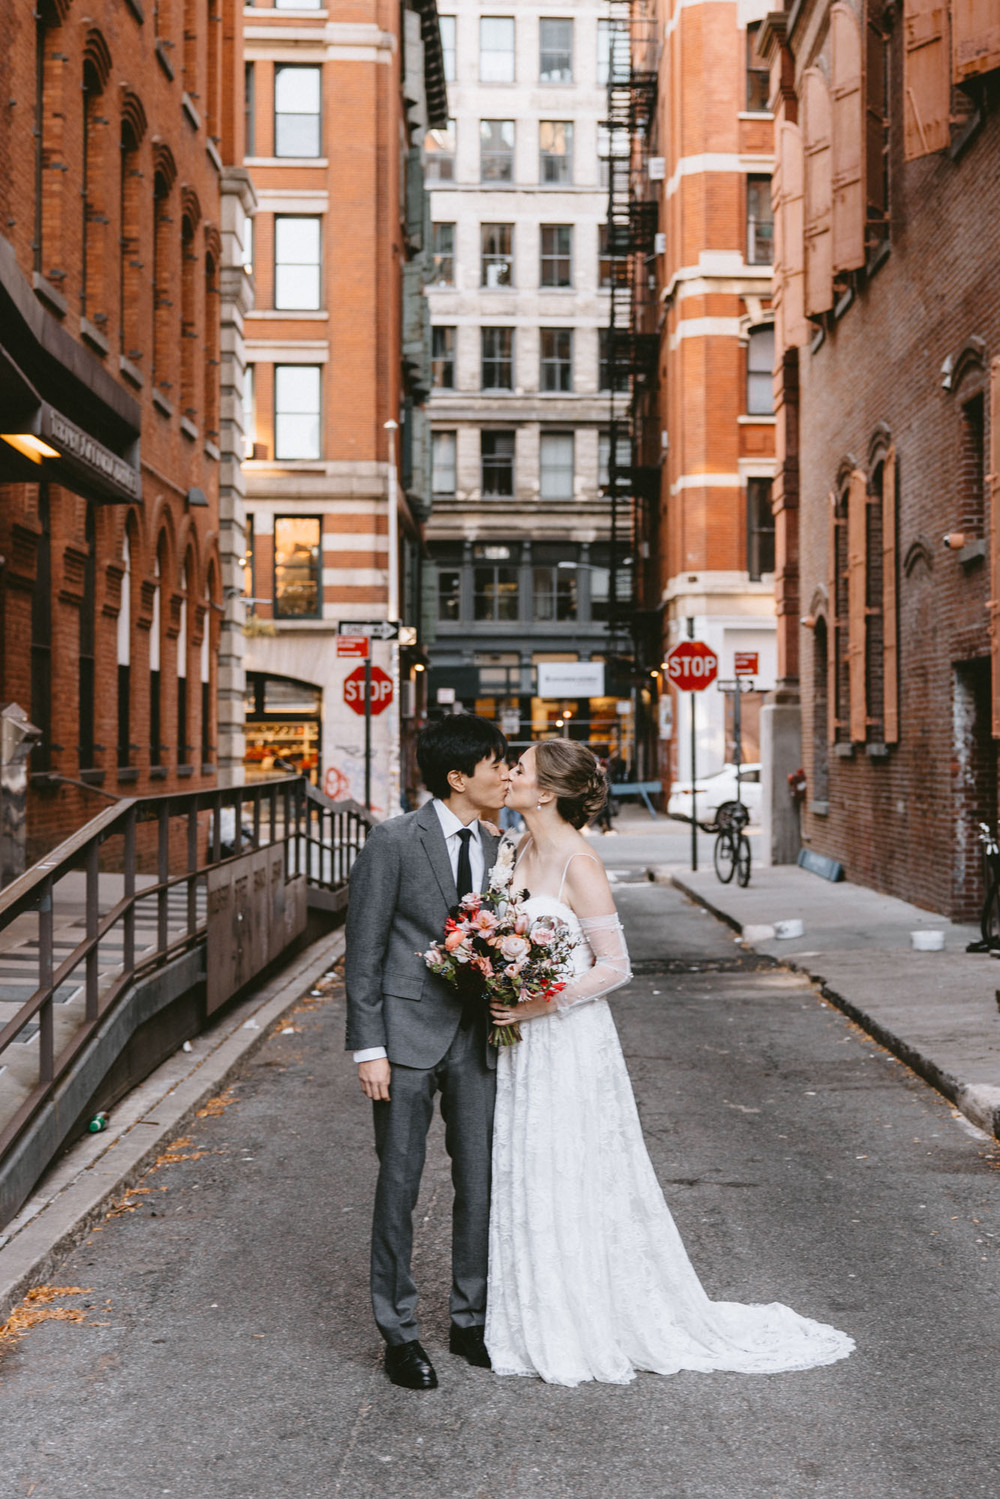 Modern + Romantic Elopement Inspiration in NYC